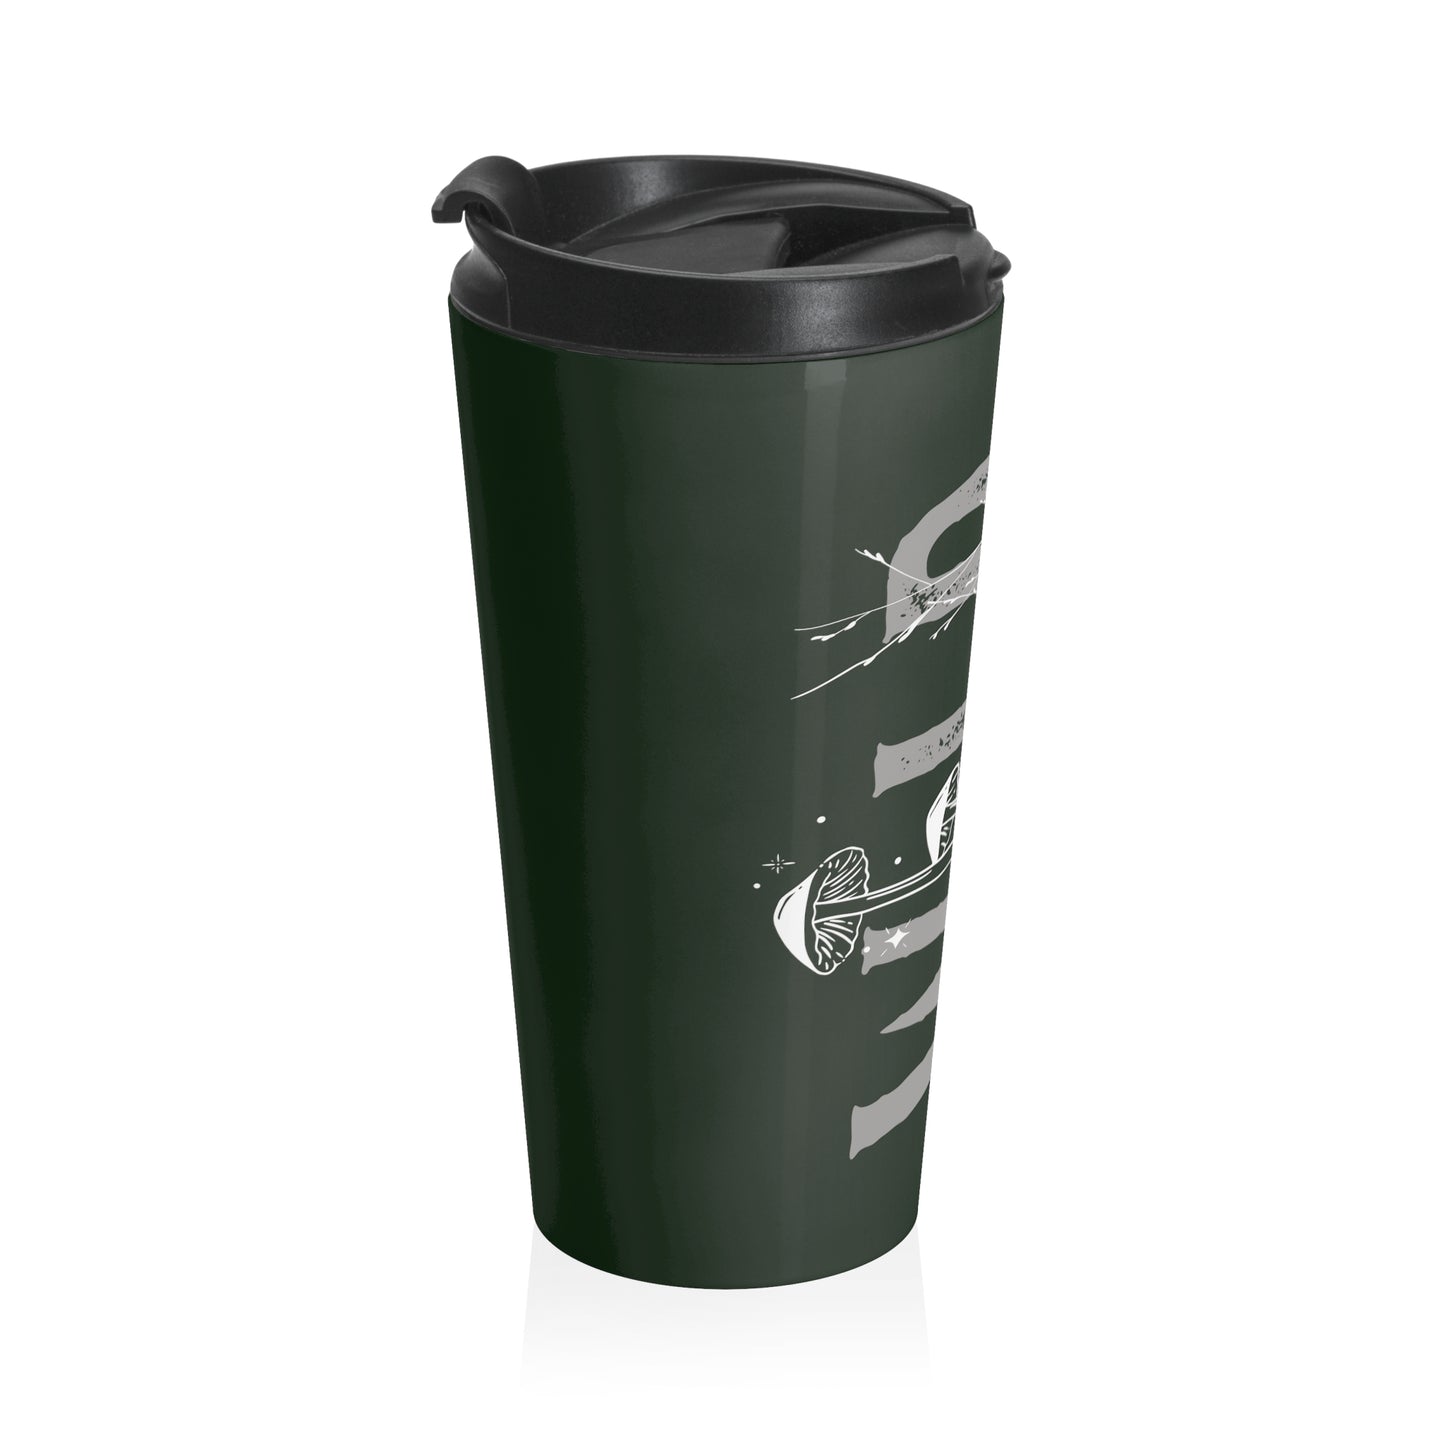 Copy of Love (Travel) Potion 15oz Travel Mug with Screw On Lid